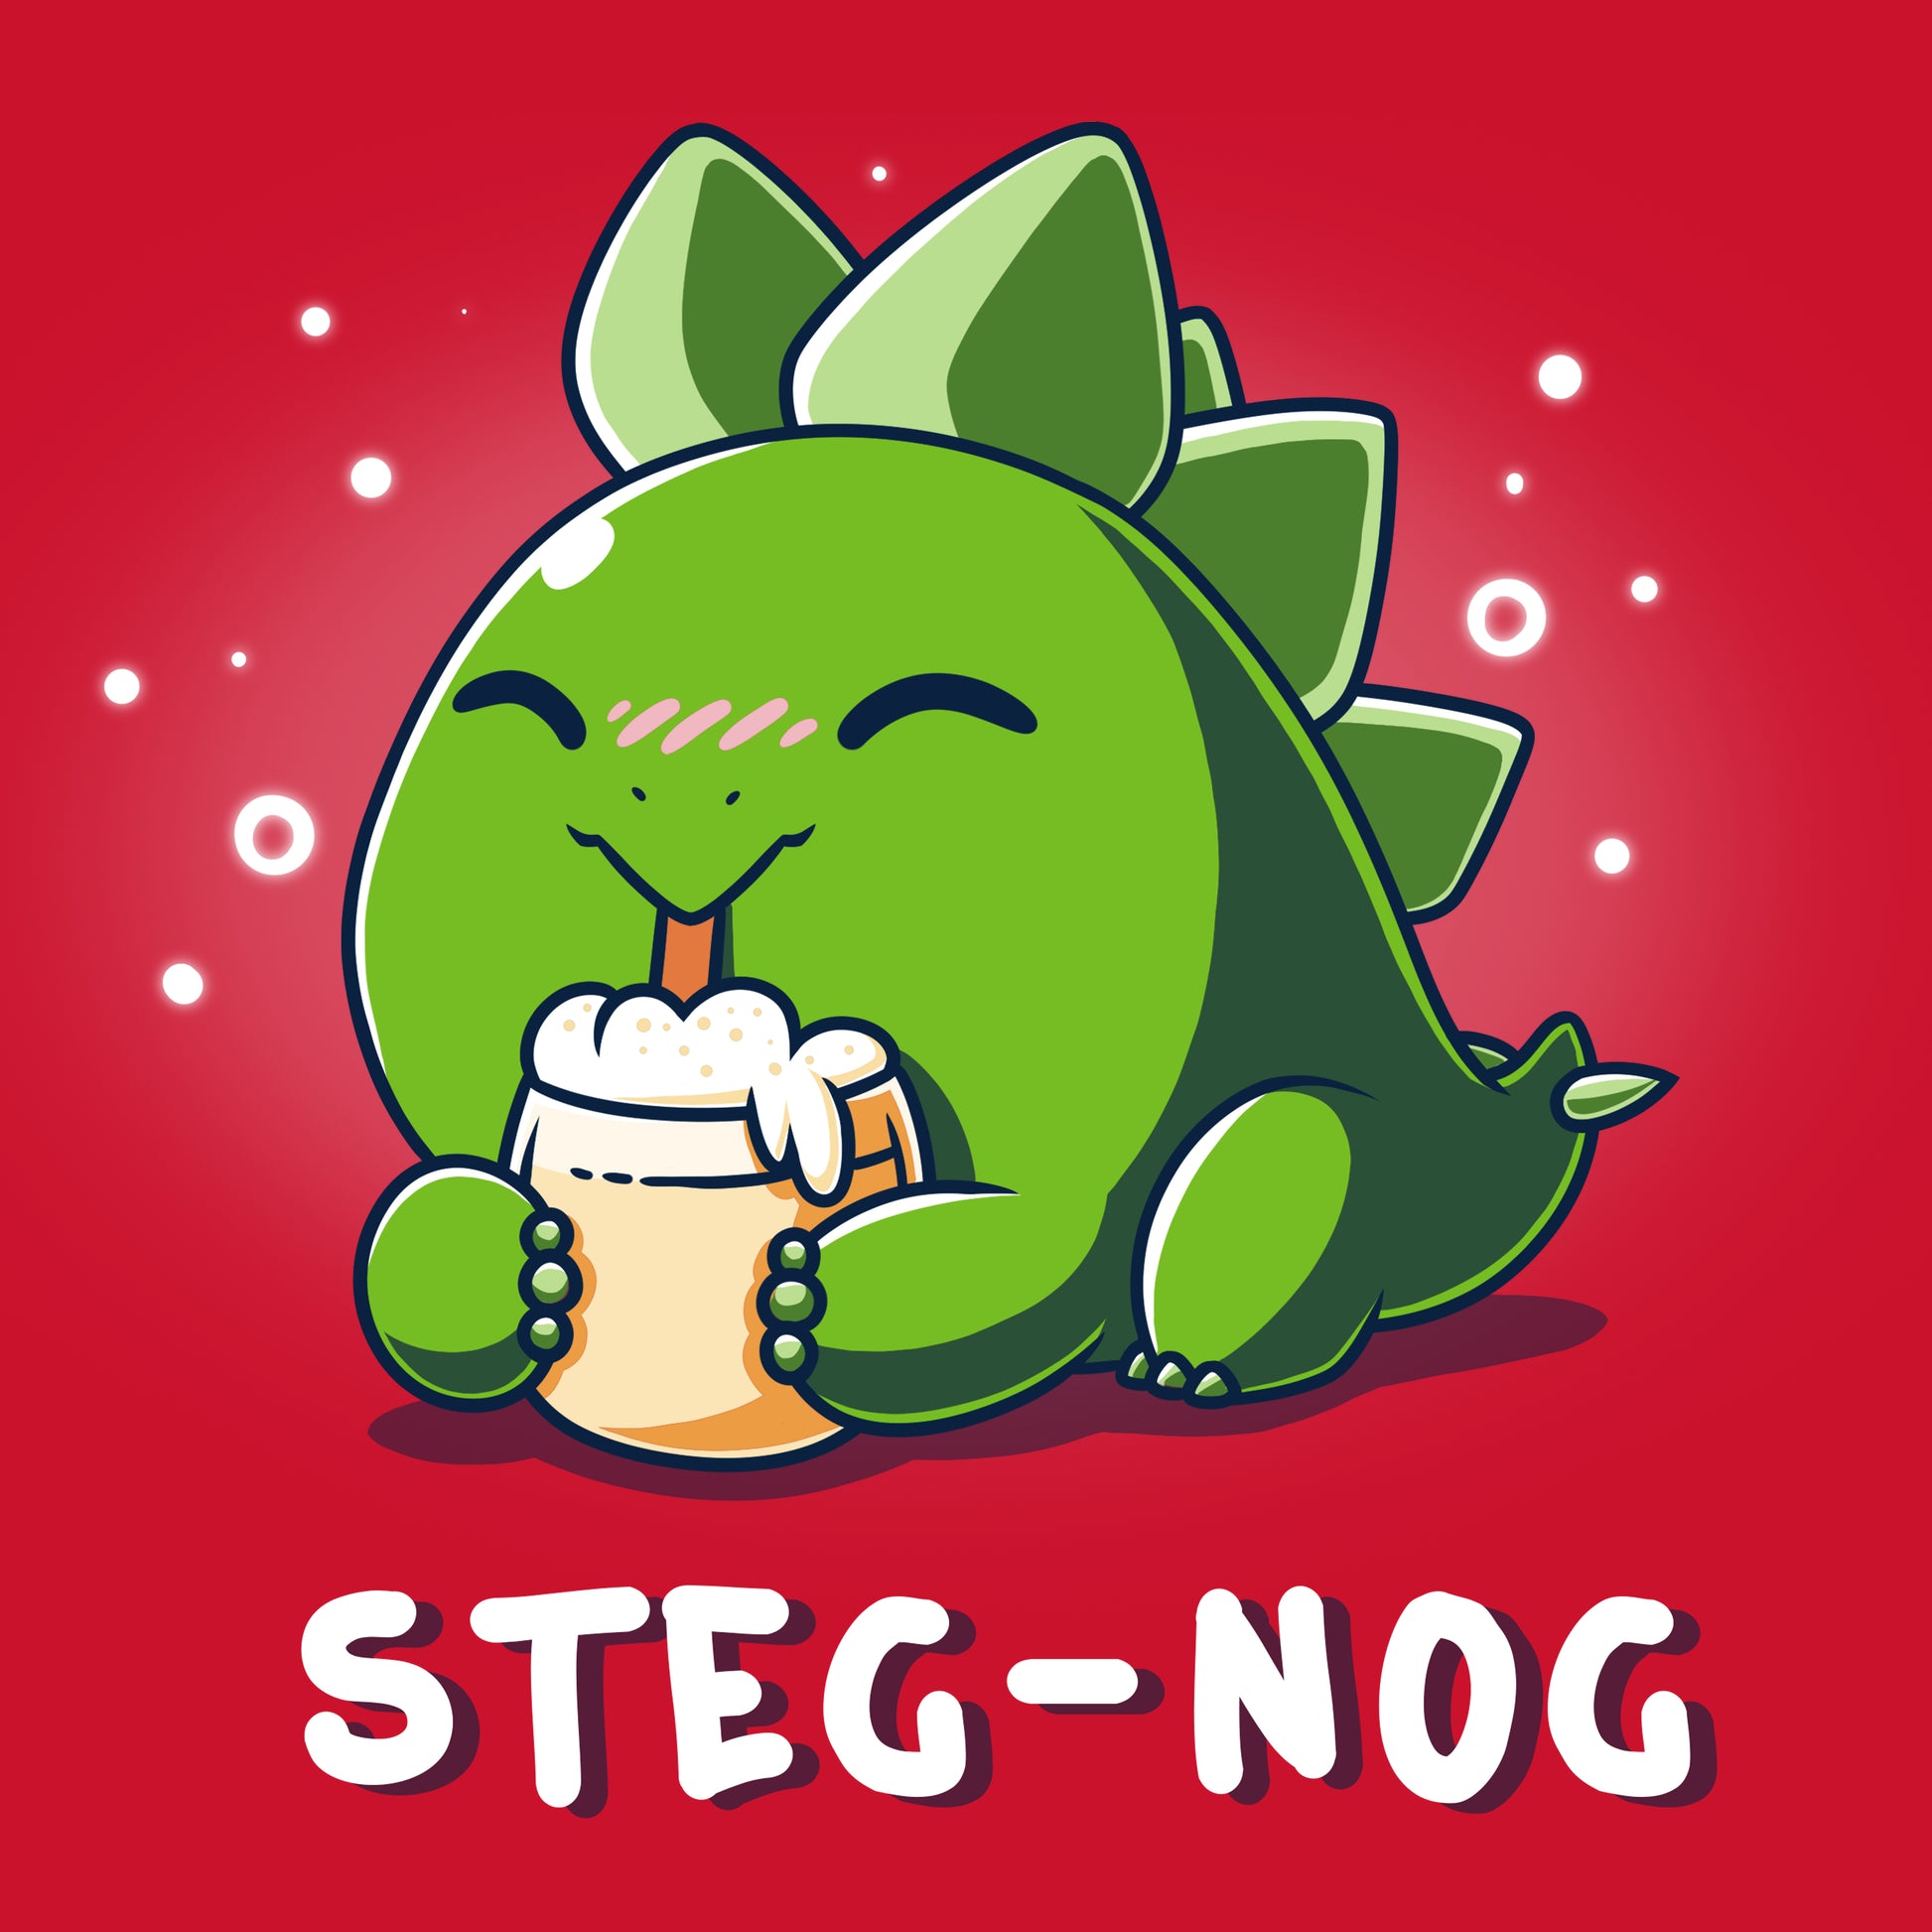 Celebrate the holidays with TeeTurtle's Steg-nog, a festive beverage infused with the delicious flavors of steg and nog. Brought to you by TeeTurtle, this special drink is perfect.